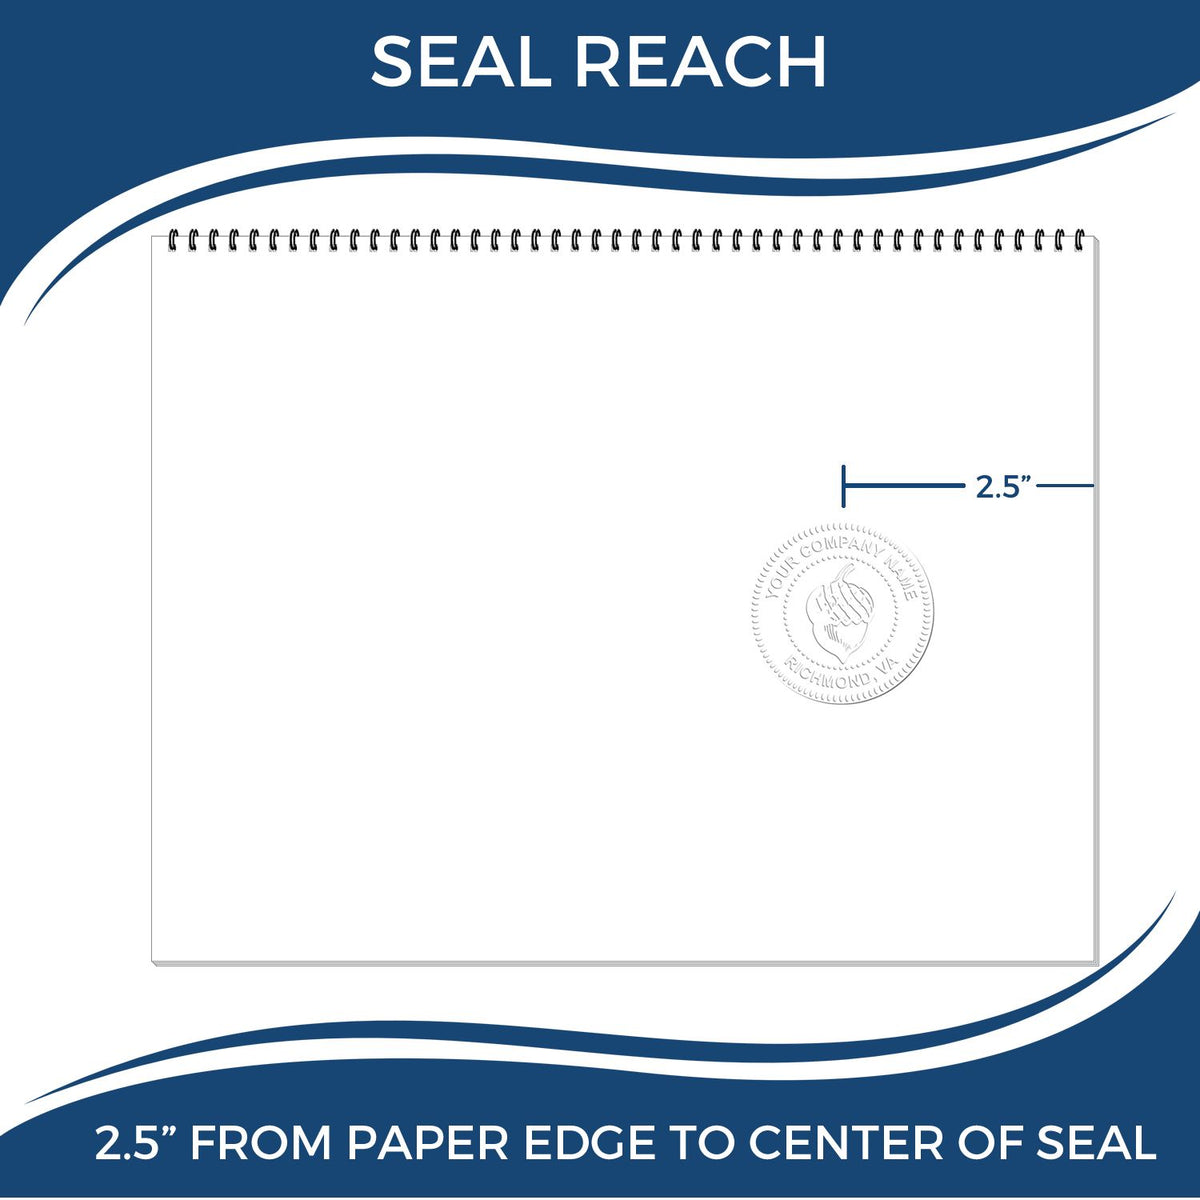 An infographic showing the seal reach which is represented by a ruler and a miniature seal image of the State of Illinois Long Reach Architectural Embossing Seal